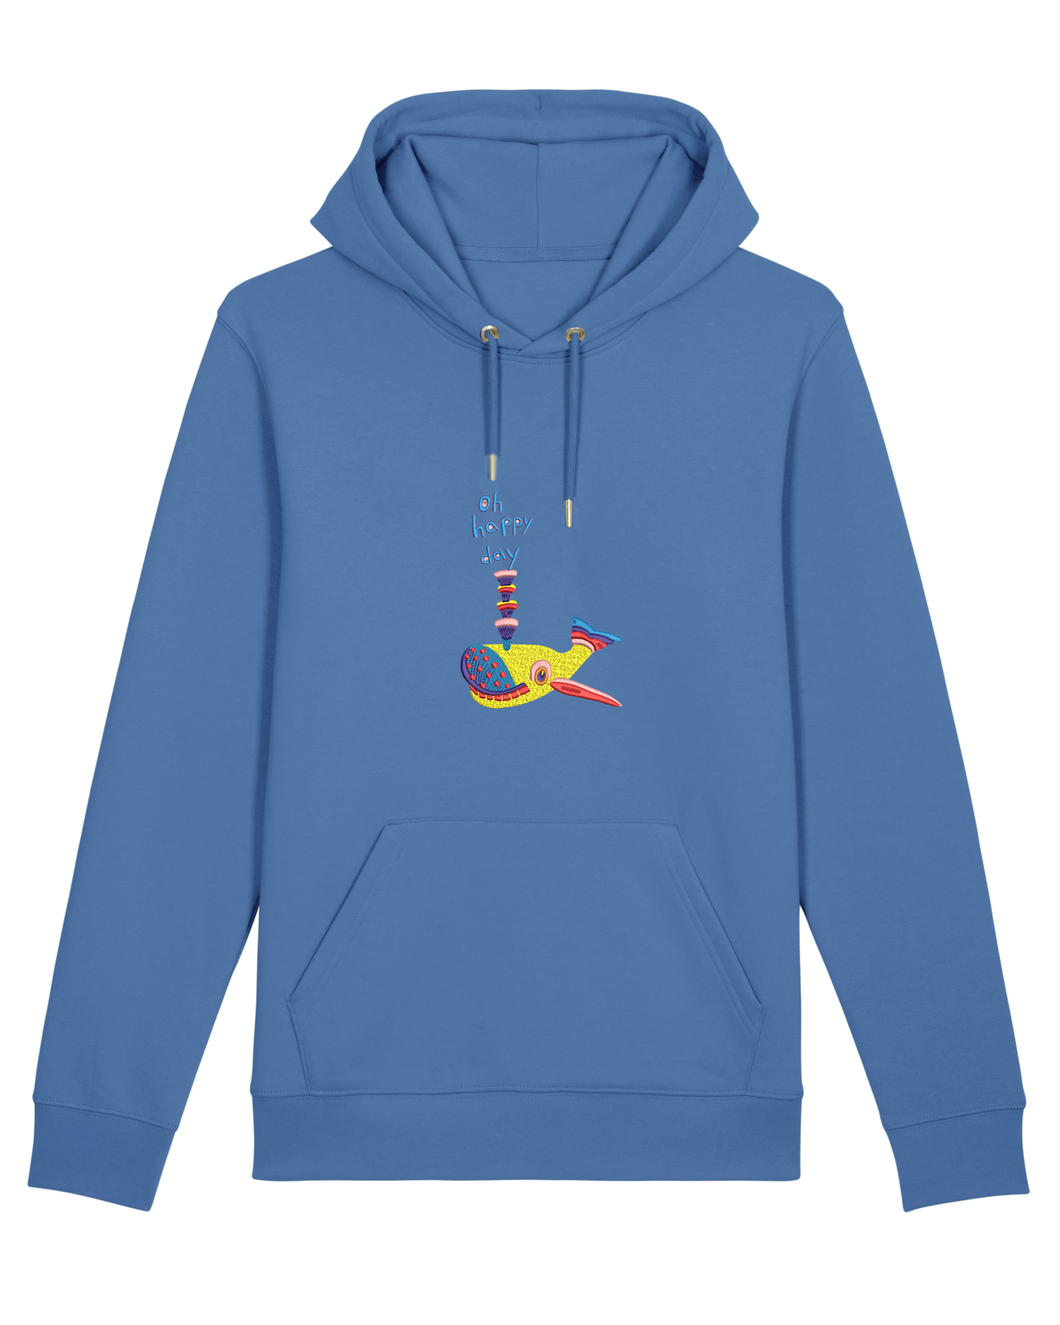 Oh happy day! 🐳 - Embroidered UNISEX hoodie